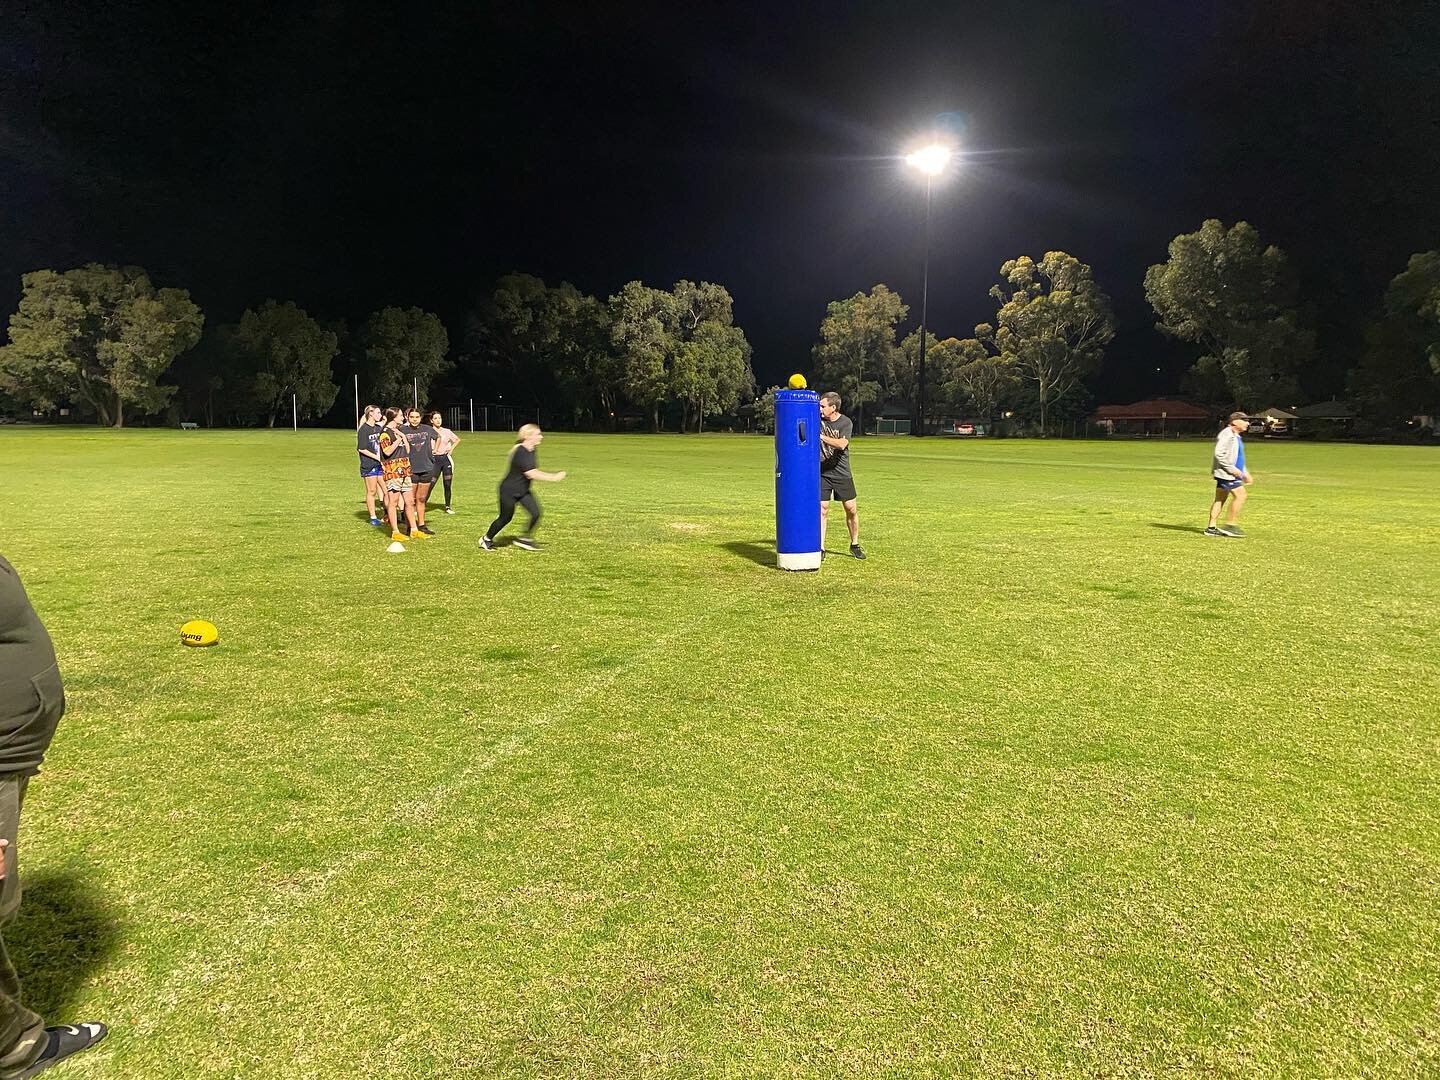 A few shots from this weeks training focusing on ball pressure and opening up the game

Reminder to get down to training Wednesday and Thursday for a 6pm start